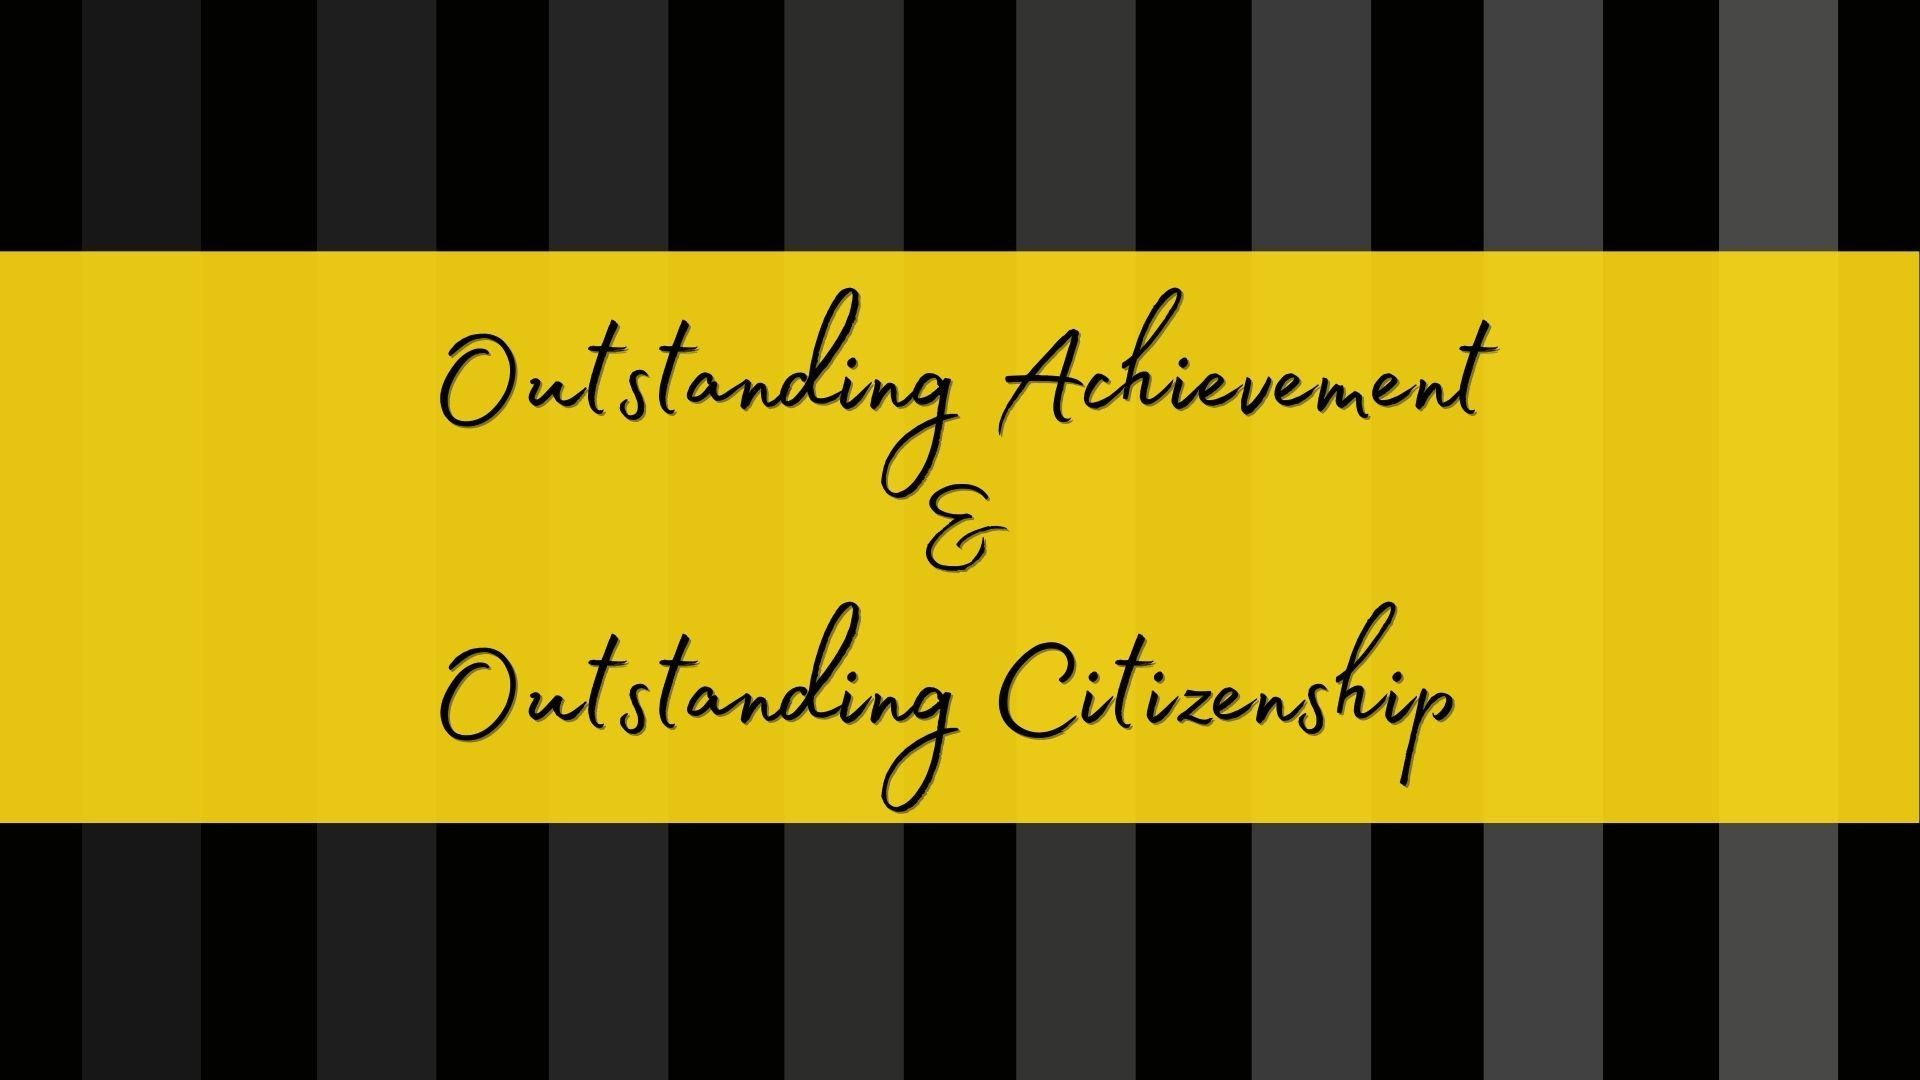 Outstanding Achievement and Outstanding Citizenship